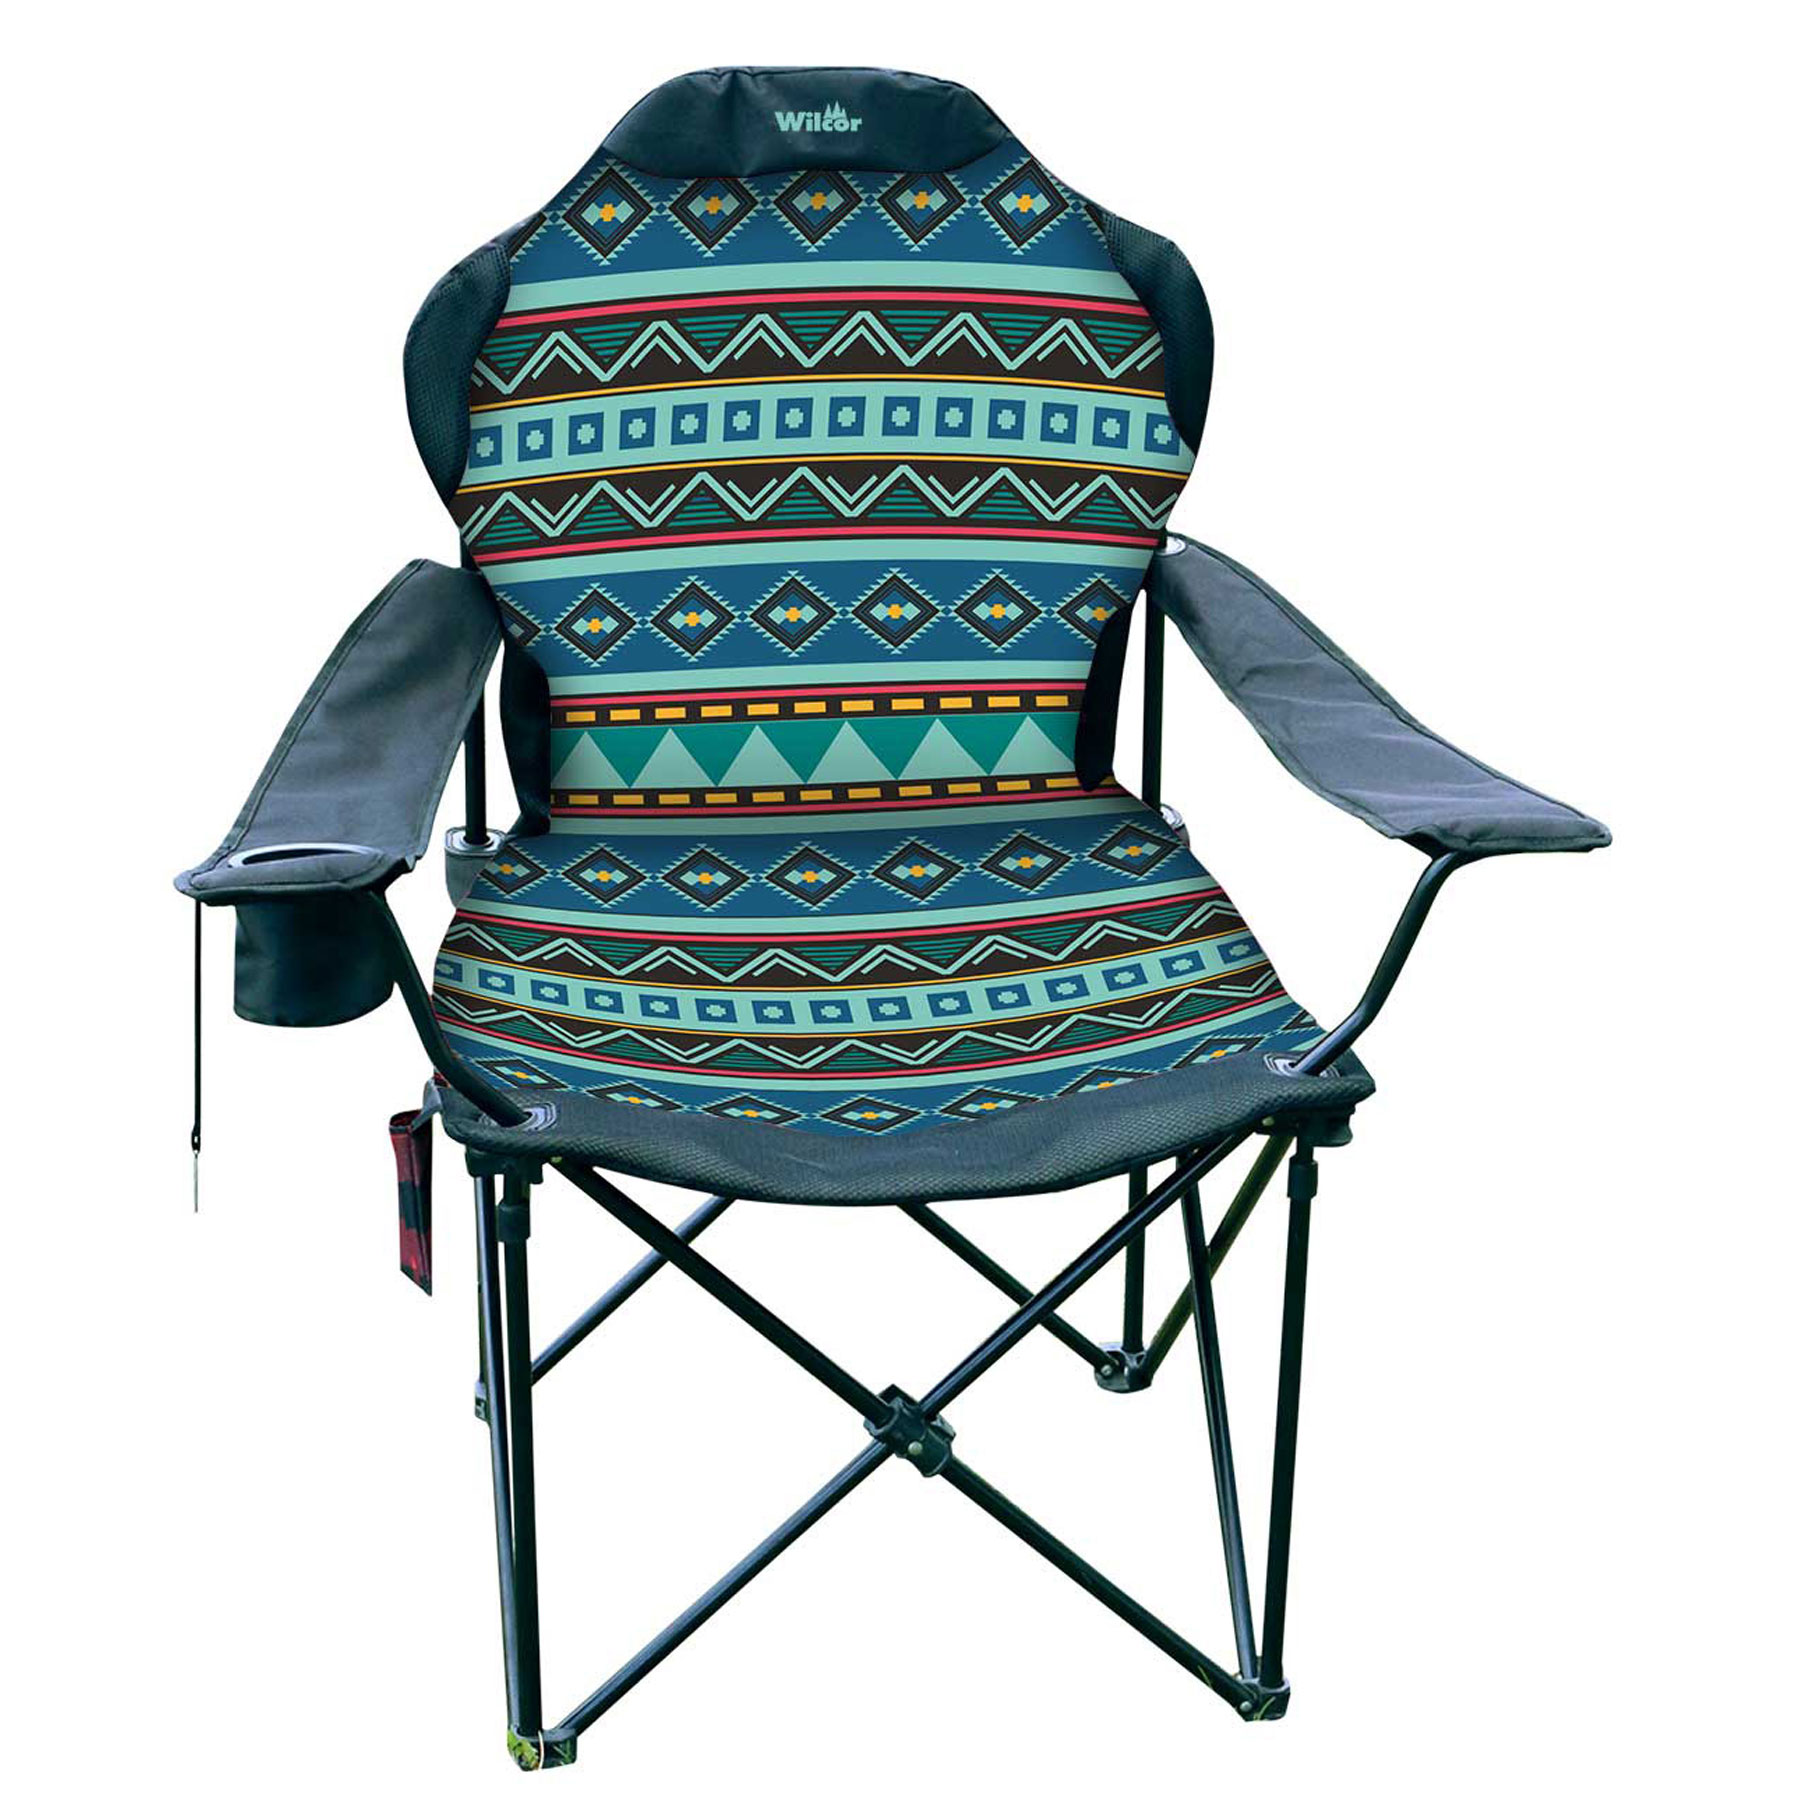 https://wilcor.net/productimages/cmp0281_padded_high_back_chair.jpg